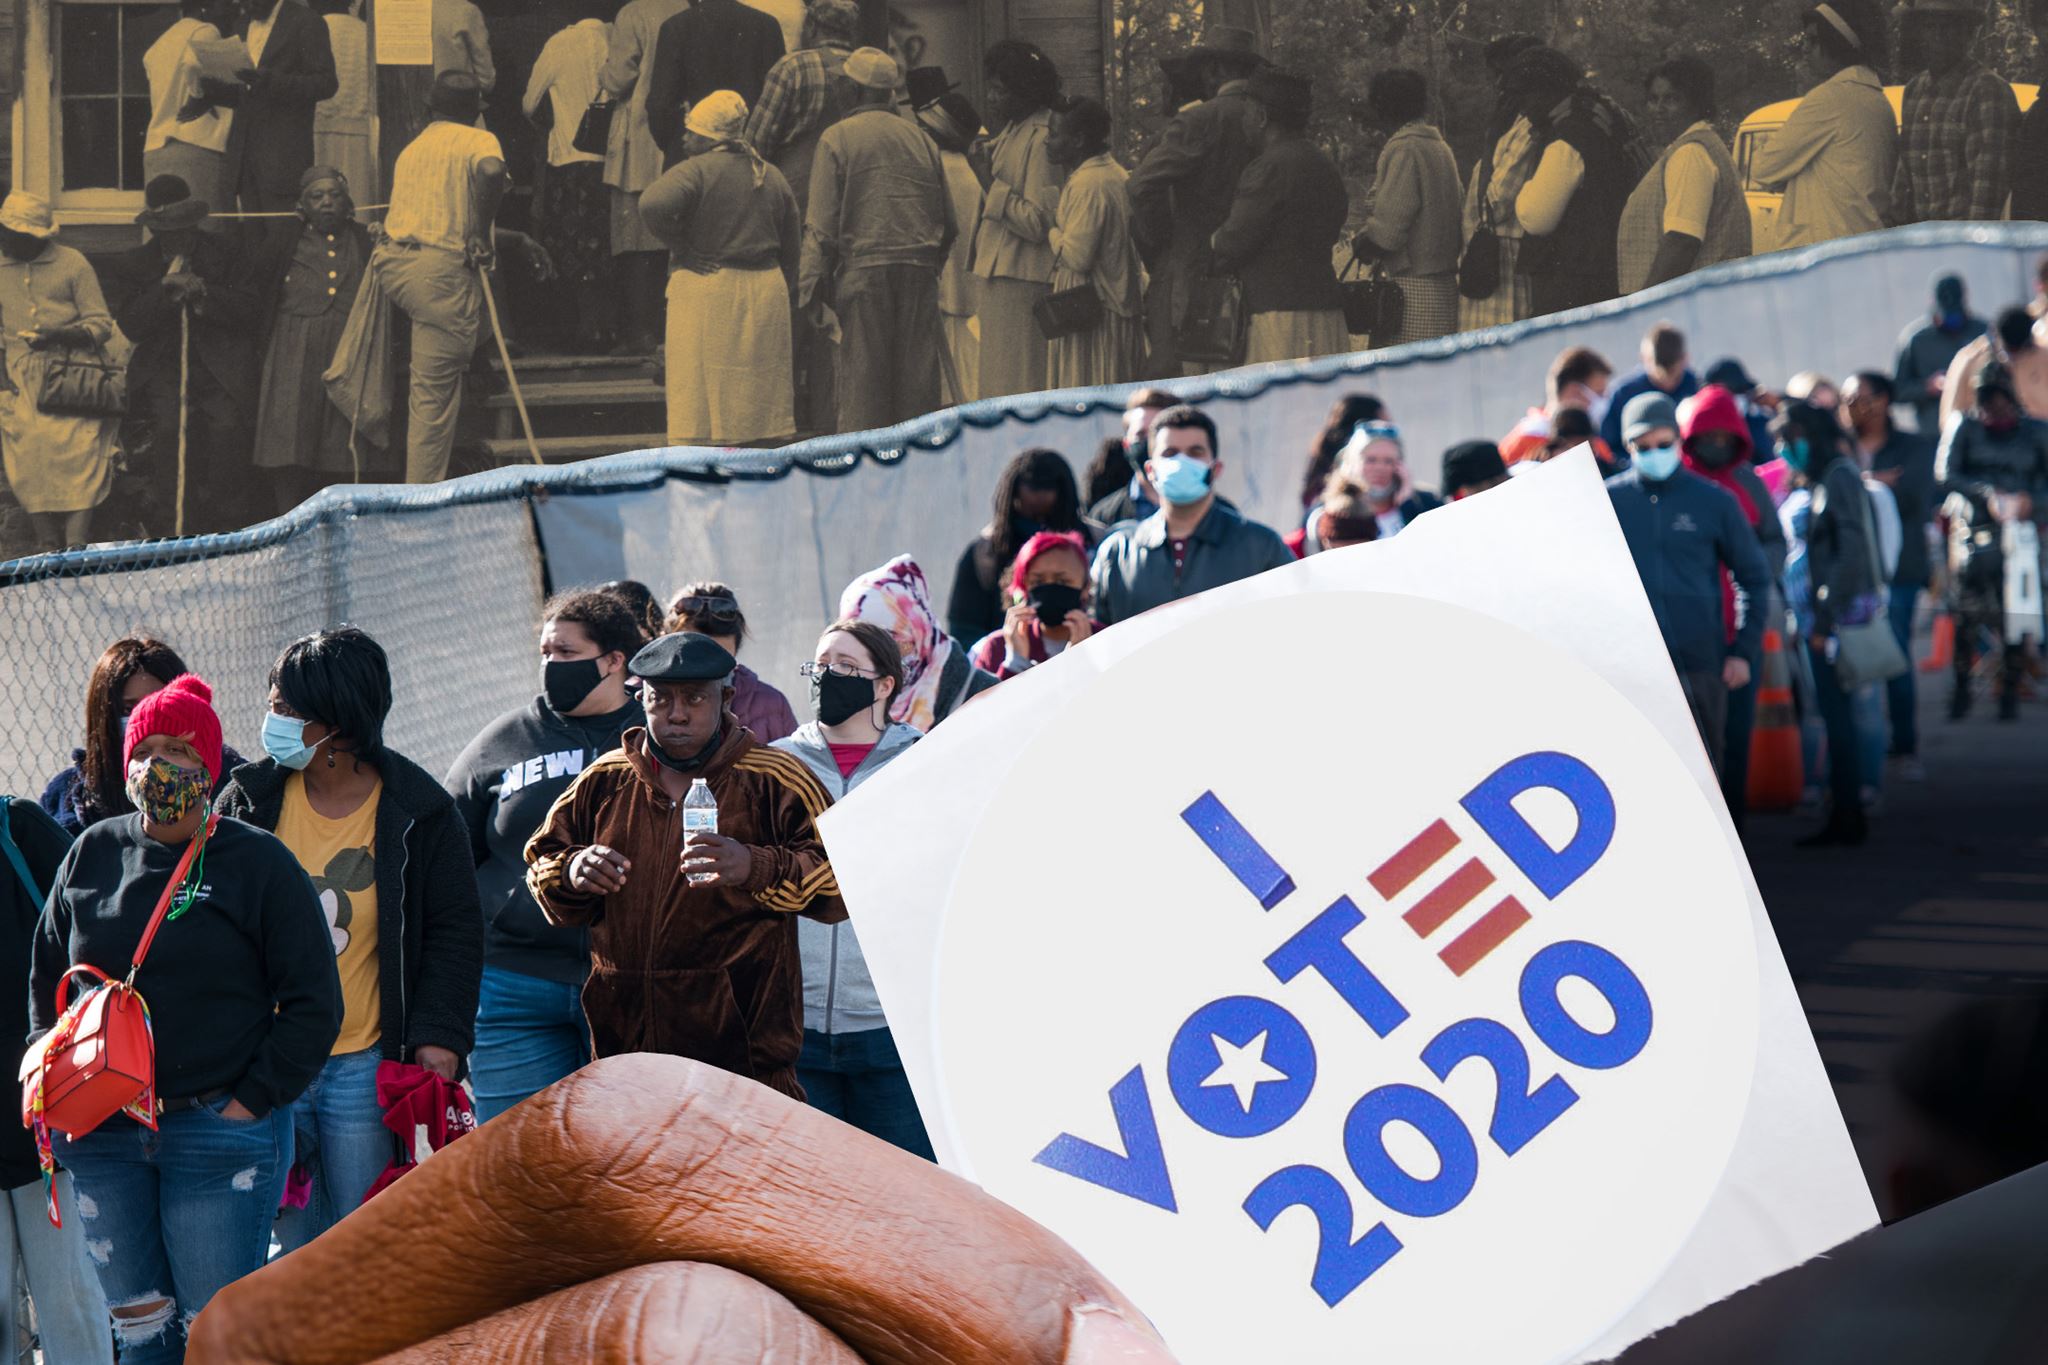 Collage juxtaposing historical lines to vote with modern-day voters